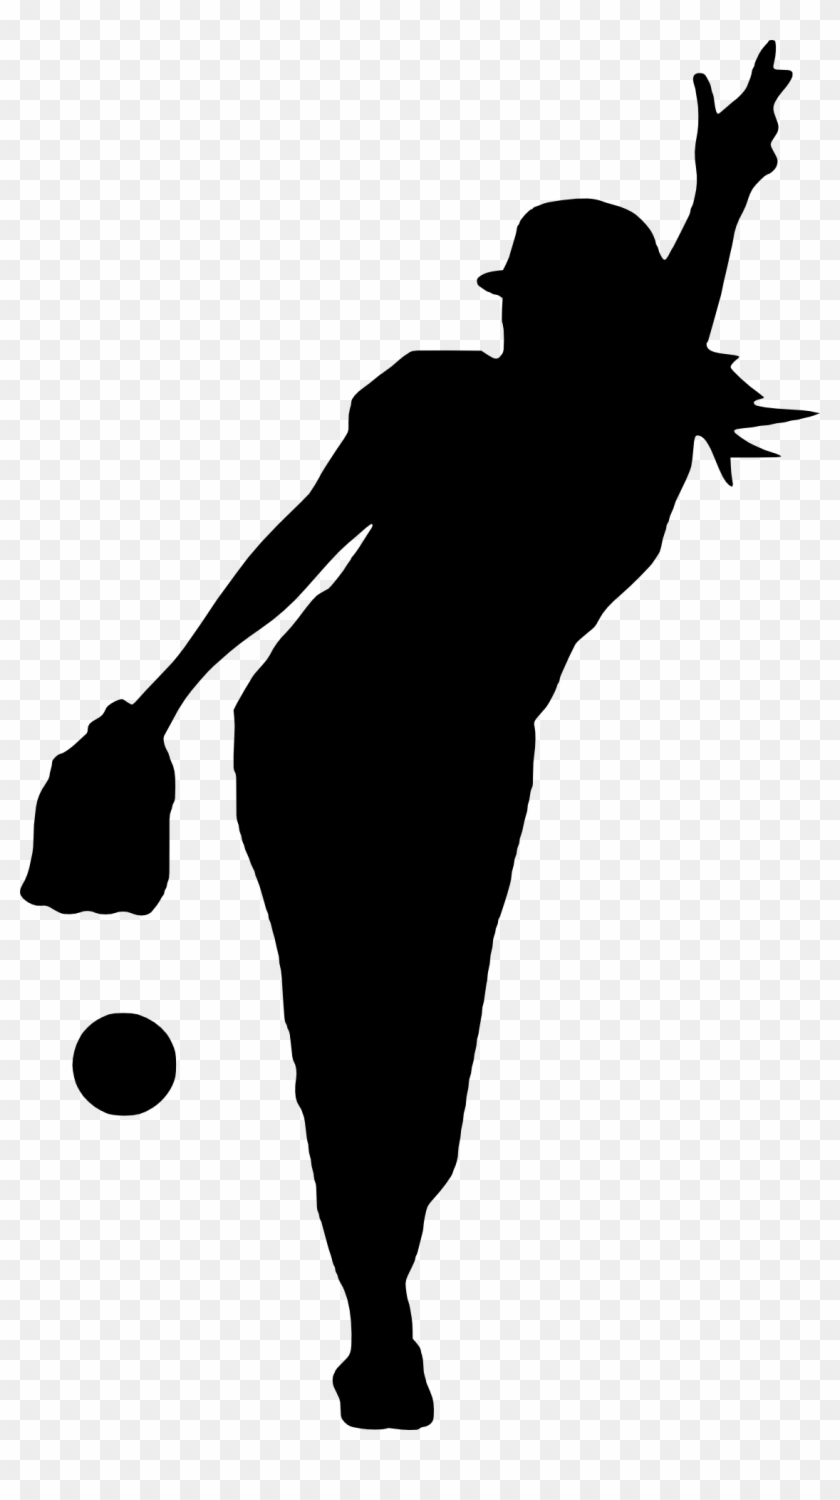 Sports, Personal Use, Girl Pitch, - Softball Pitcher Silhouette #1038796